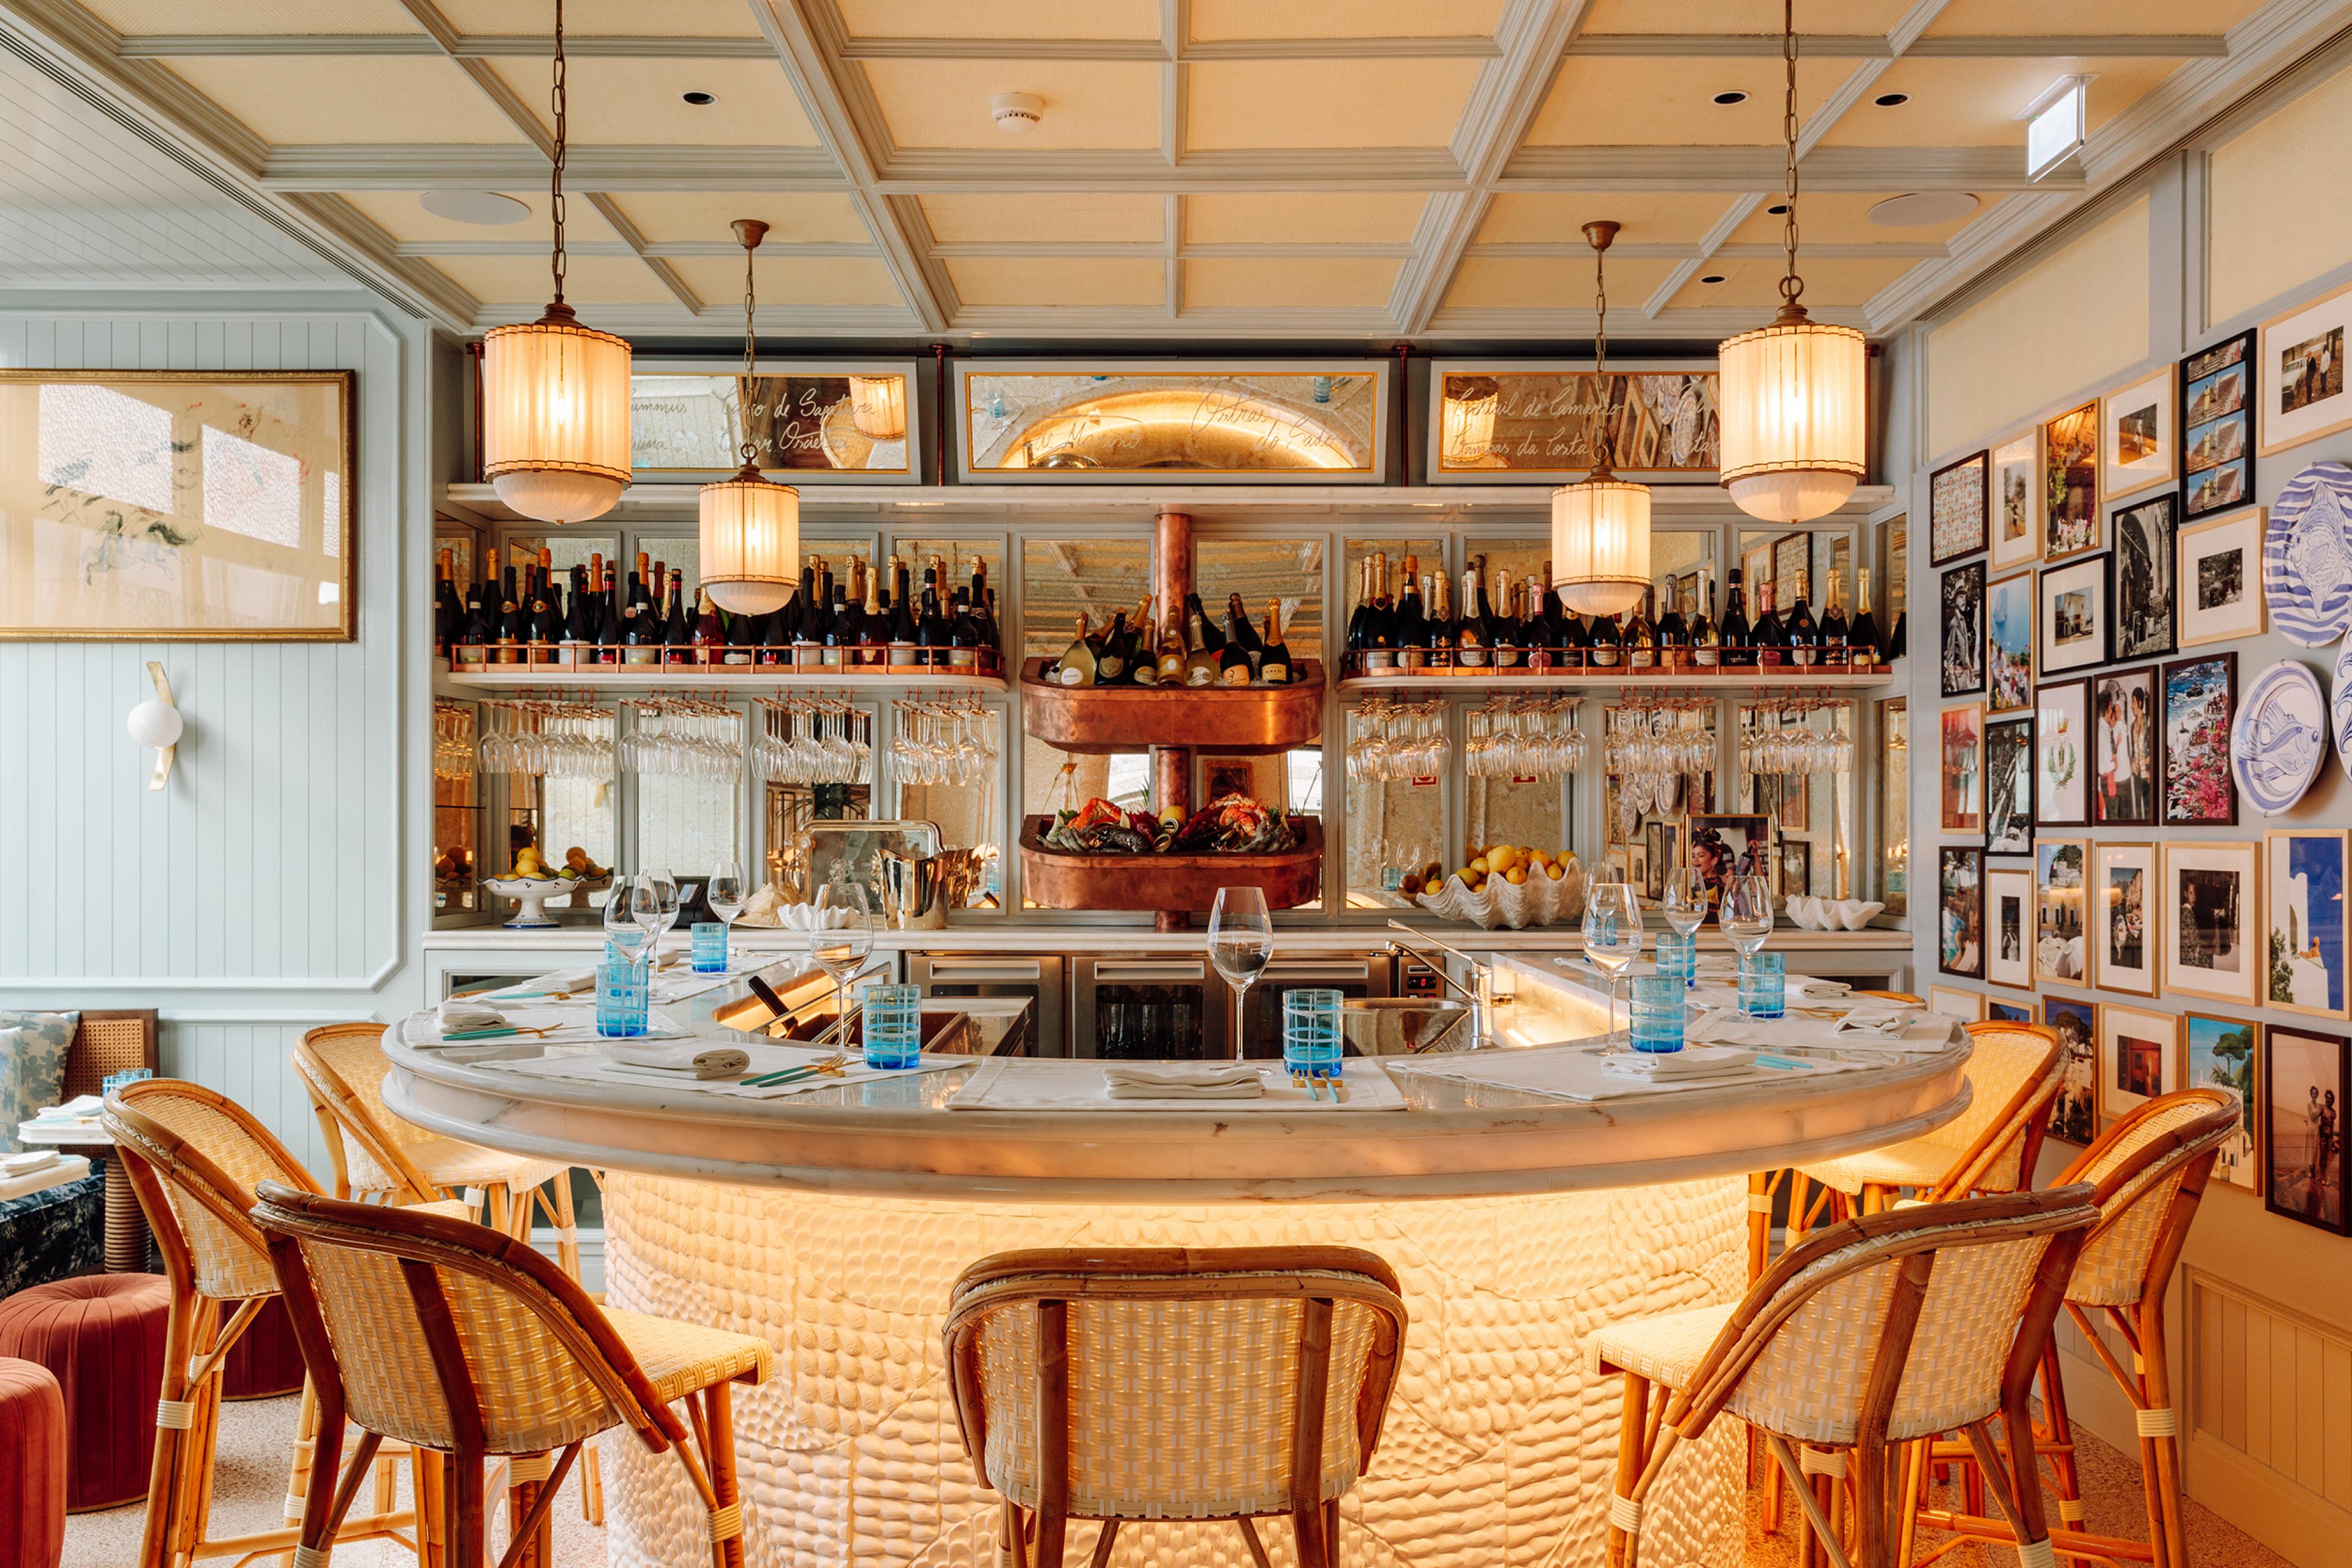 U-shaped bar surrounded by wicker chairs against a back mirrored wall stocked with champagne bottles and wine glasses